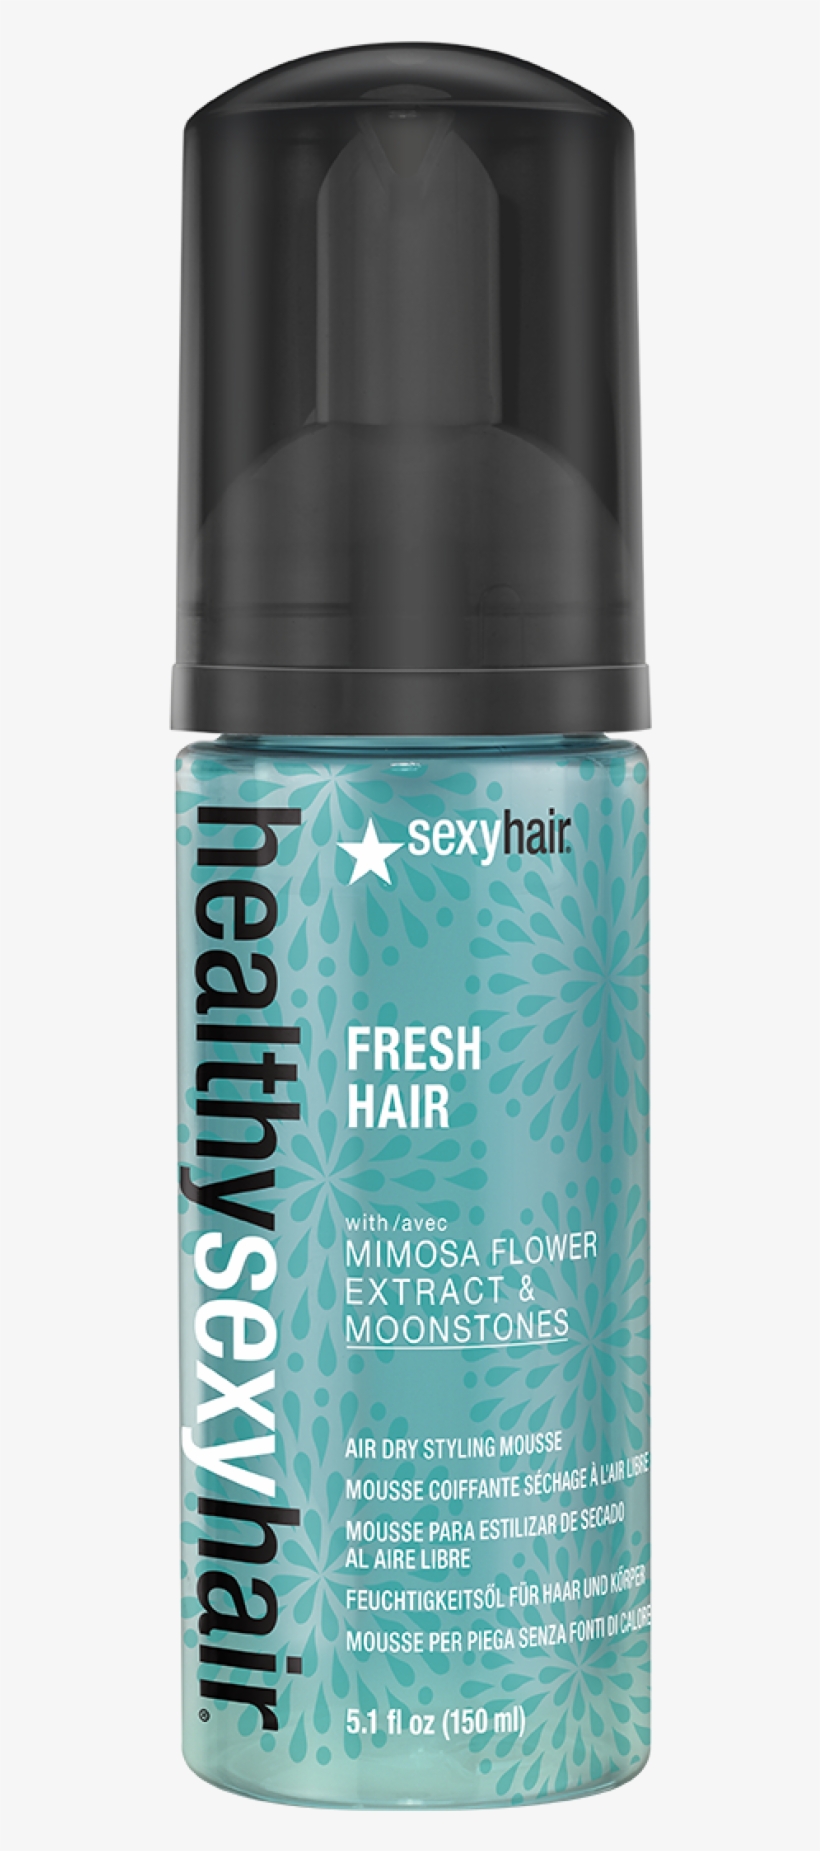 Fresh Hair Air Dry Styling Mousse - Sexy Hair Blonde Bombshell Blonde Conditioner 1000ml, transparent png #3640893